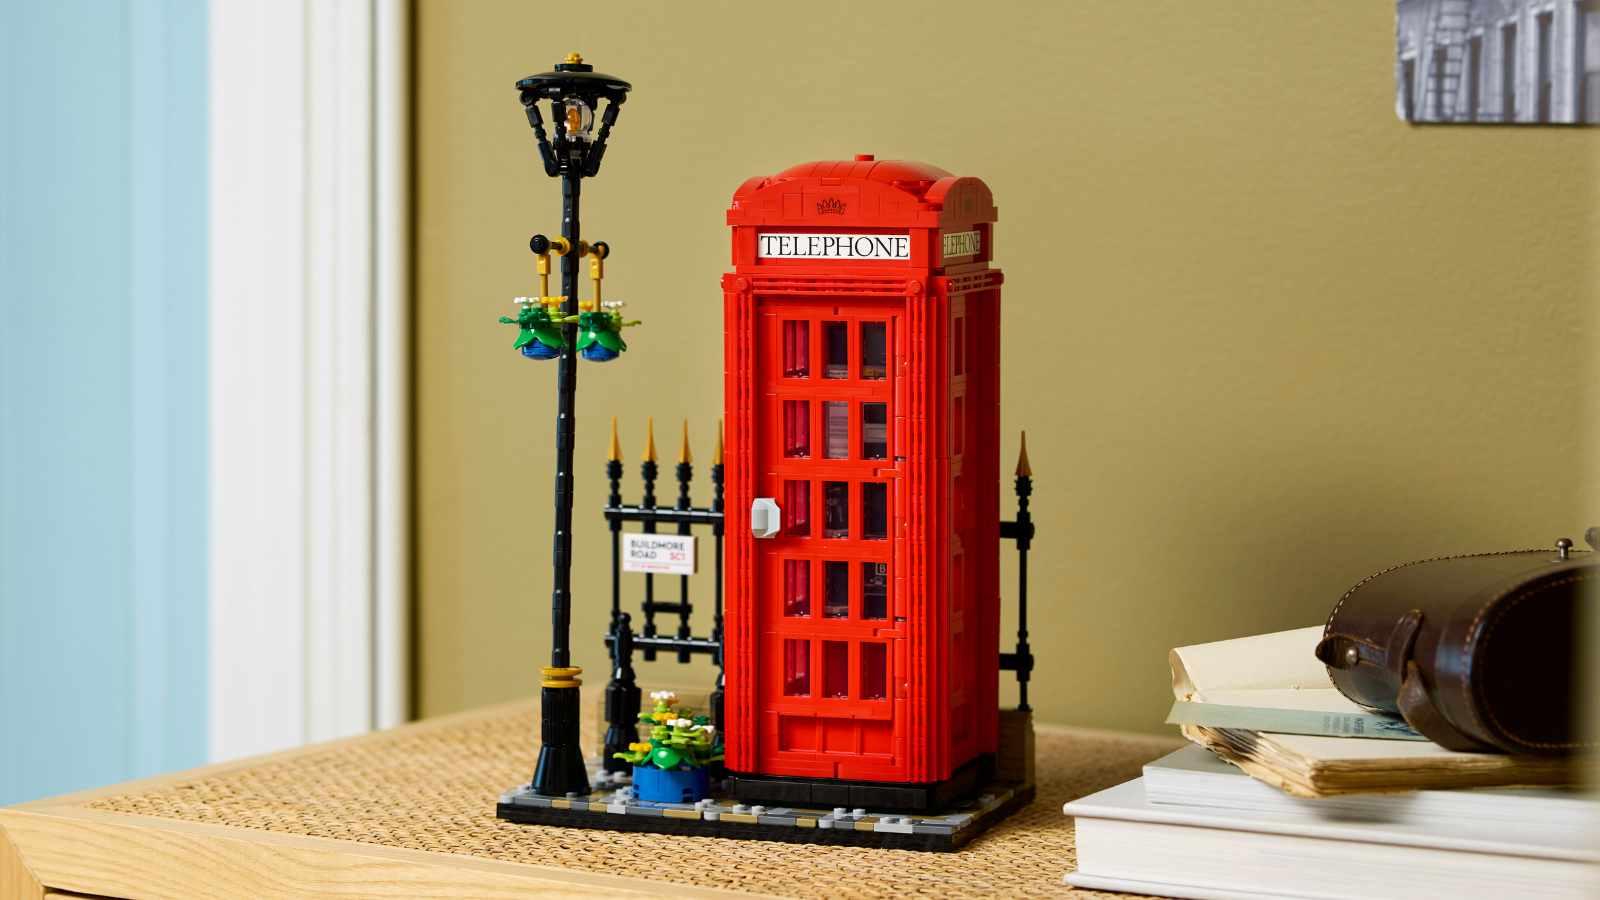 The LEGO Ideas Red London Telephone Box set on display